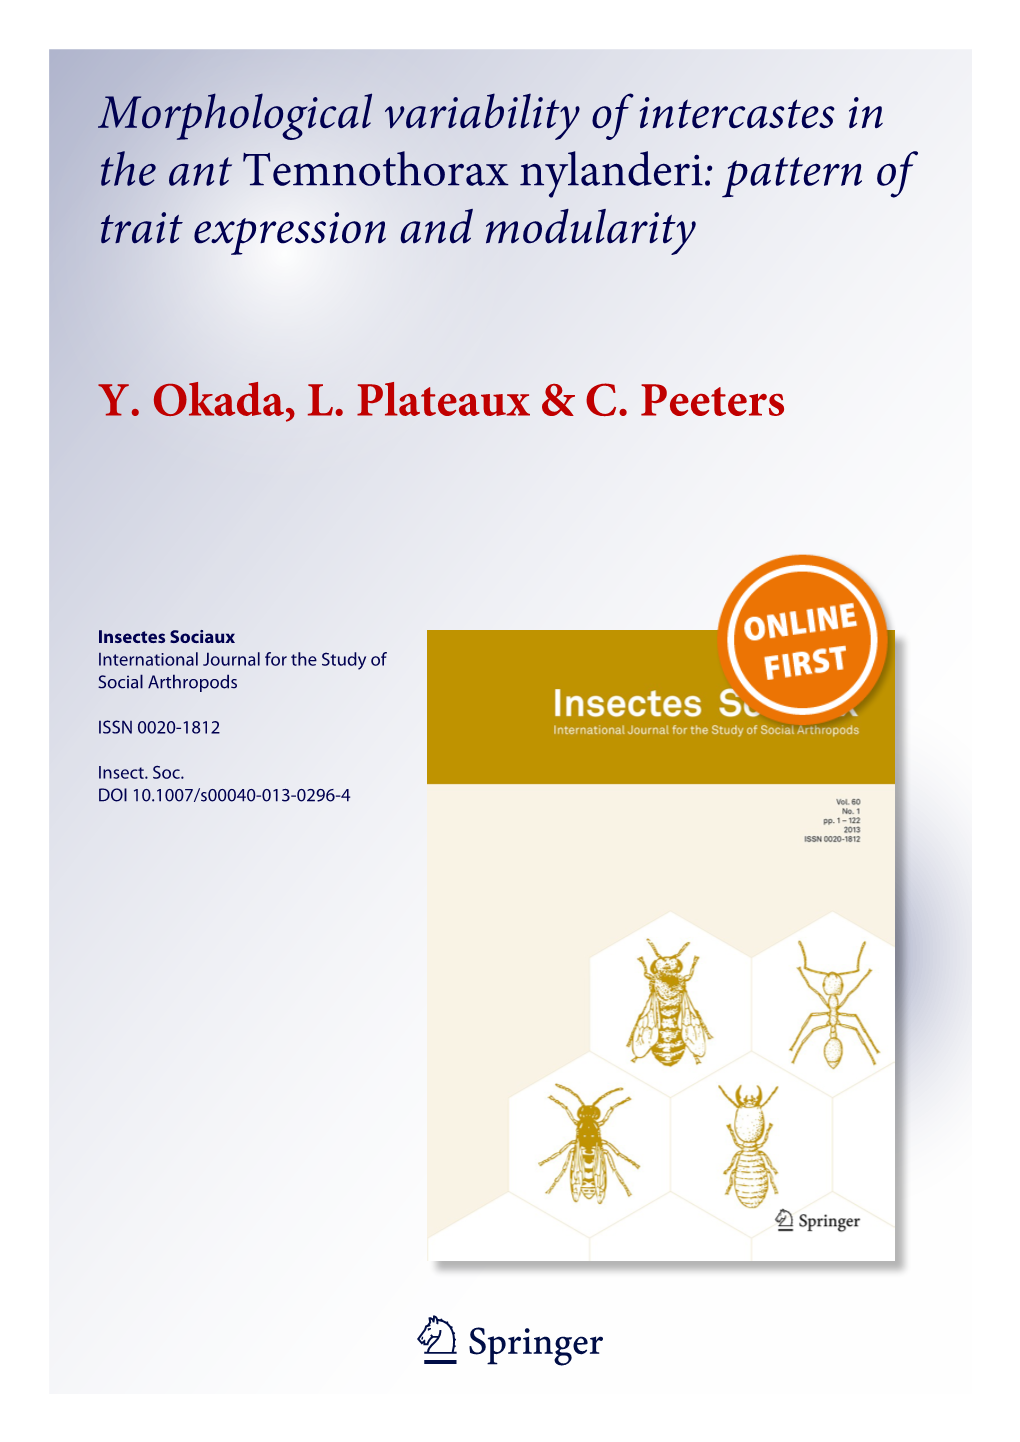 Morphological Variability of Intercastes in the Ant Temnothorax Nylanderi: Pattern of Trait Expression and Modularity